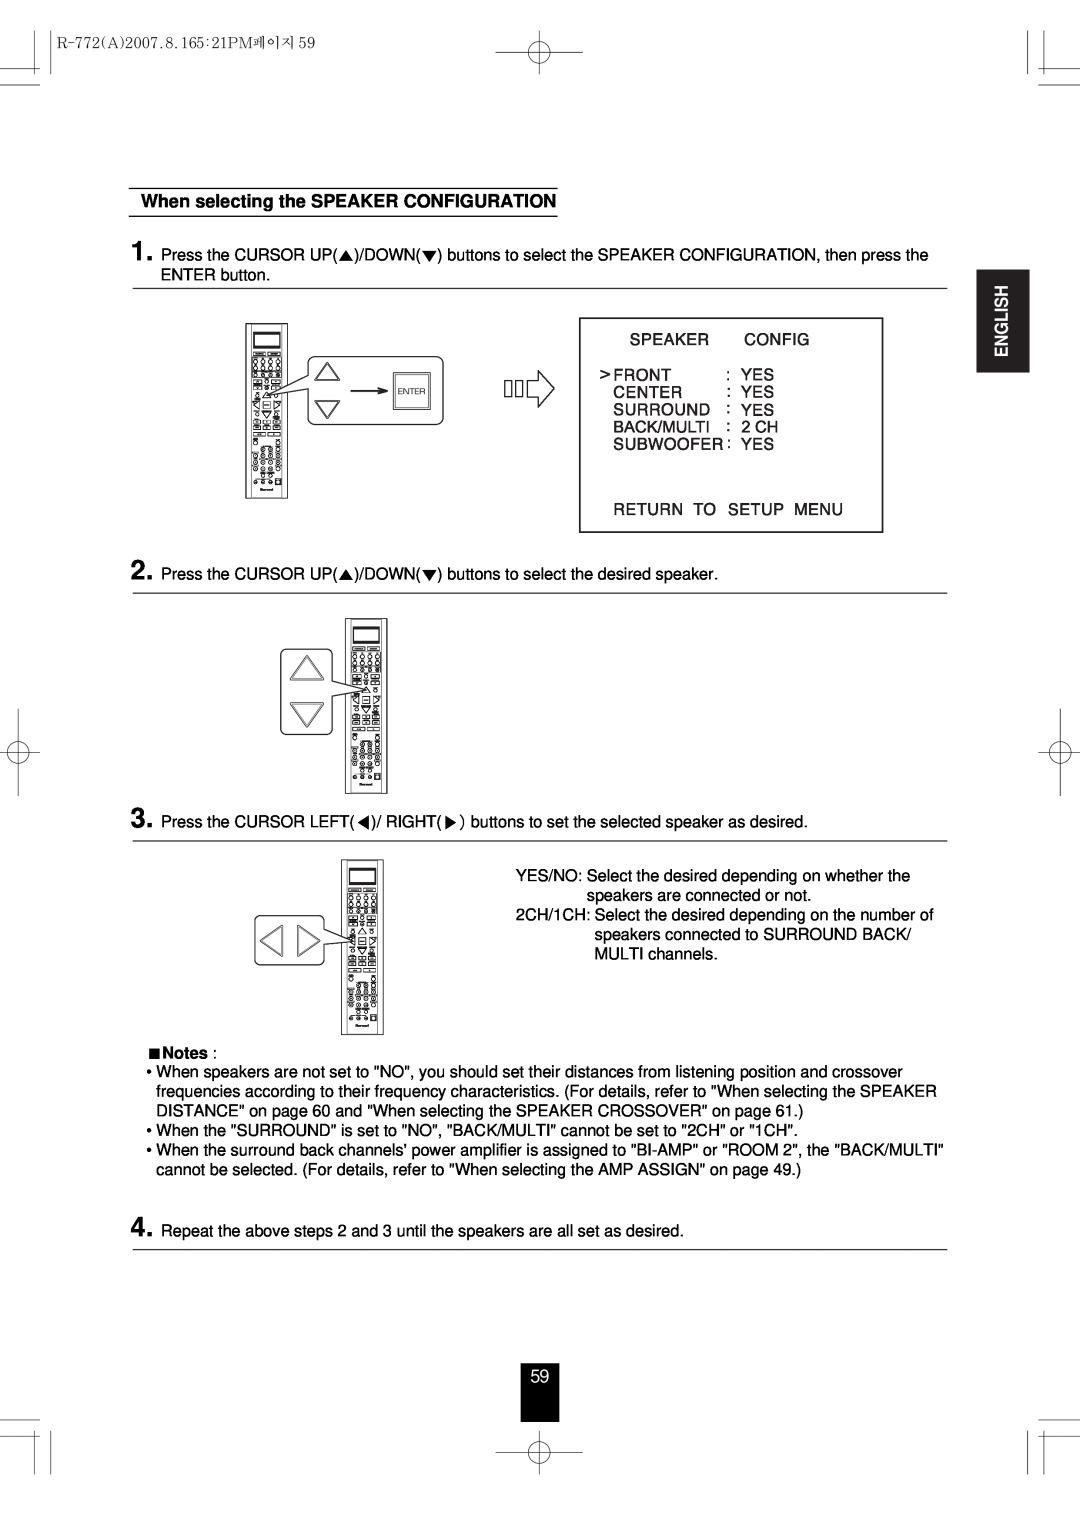 Sherwood R-772 manual When selecting the SPEAKER CONFIGURATION, English, Notes 